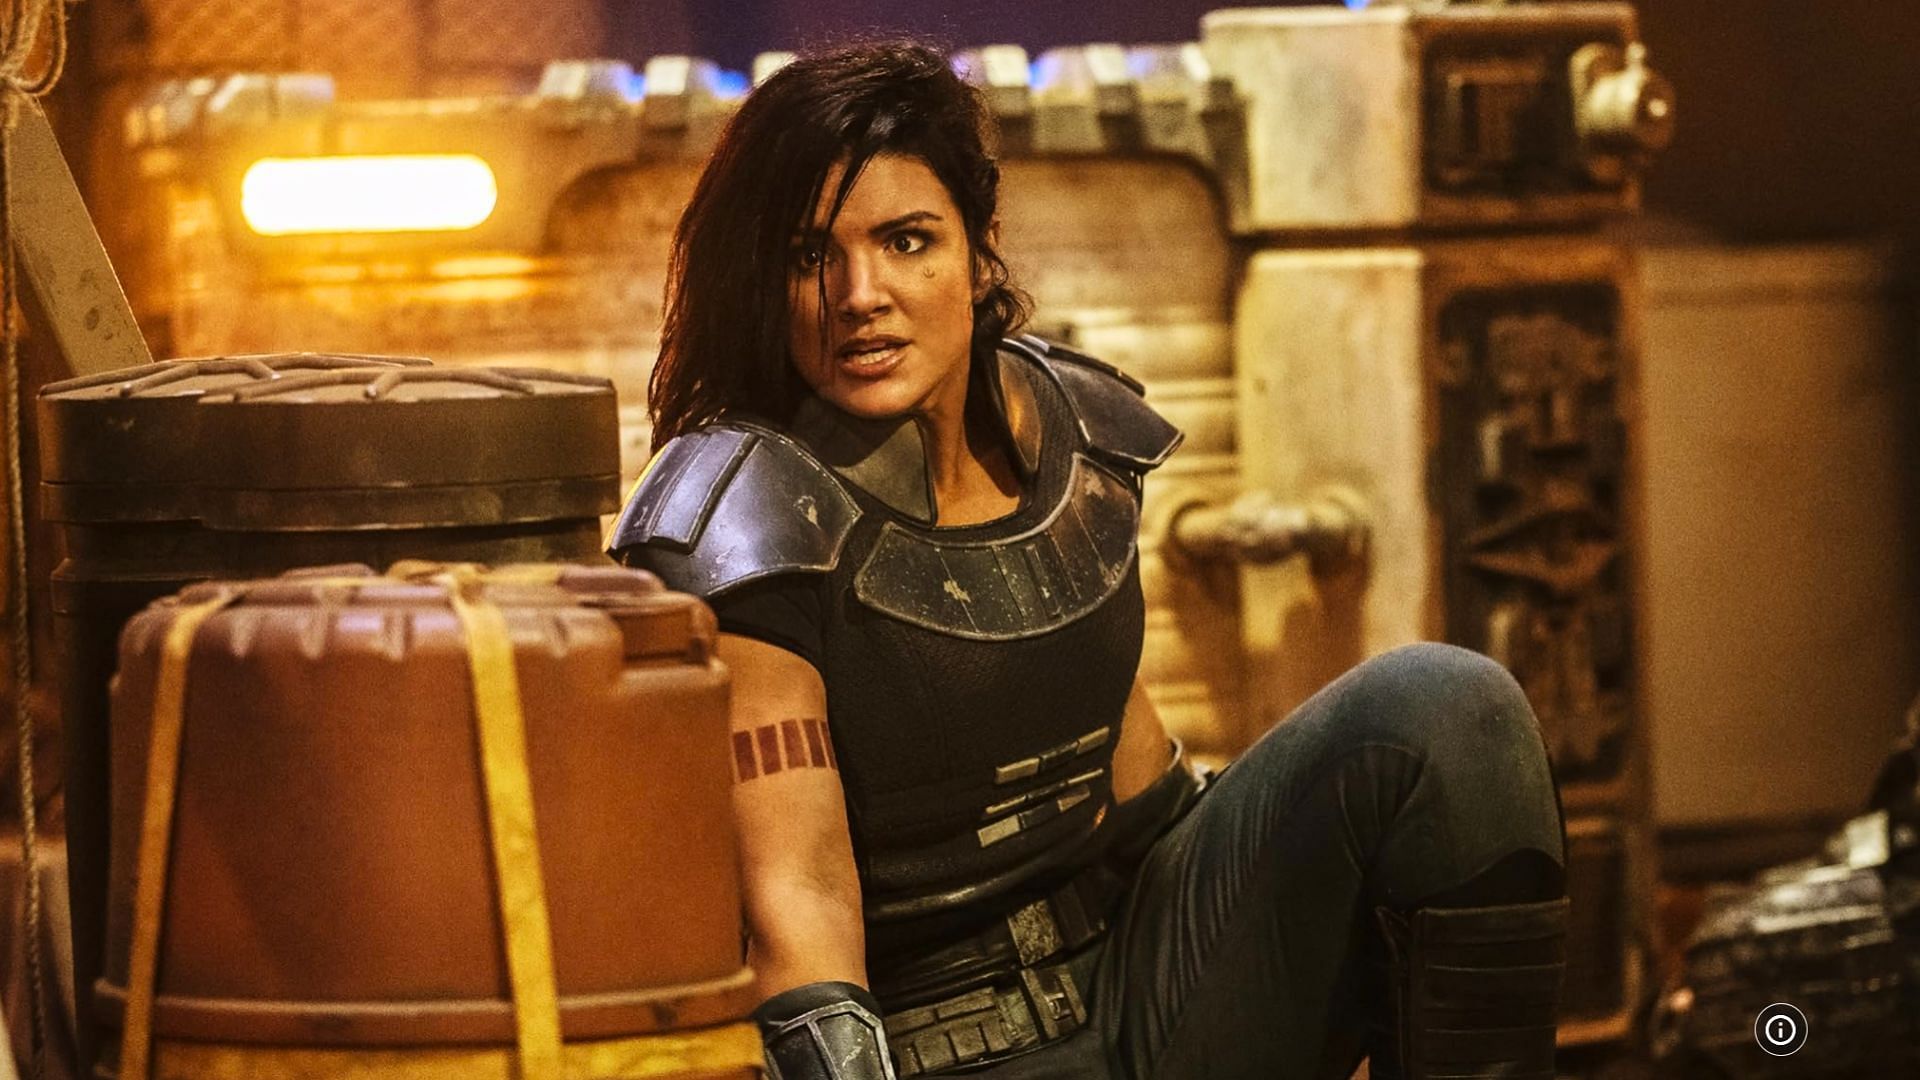 Gina in a scene from The Mandalorian (Image via Lucasfilm)